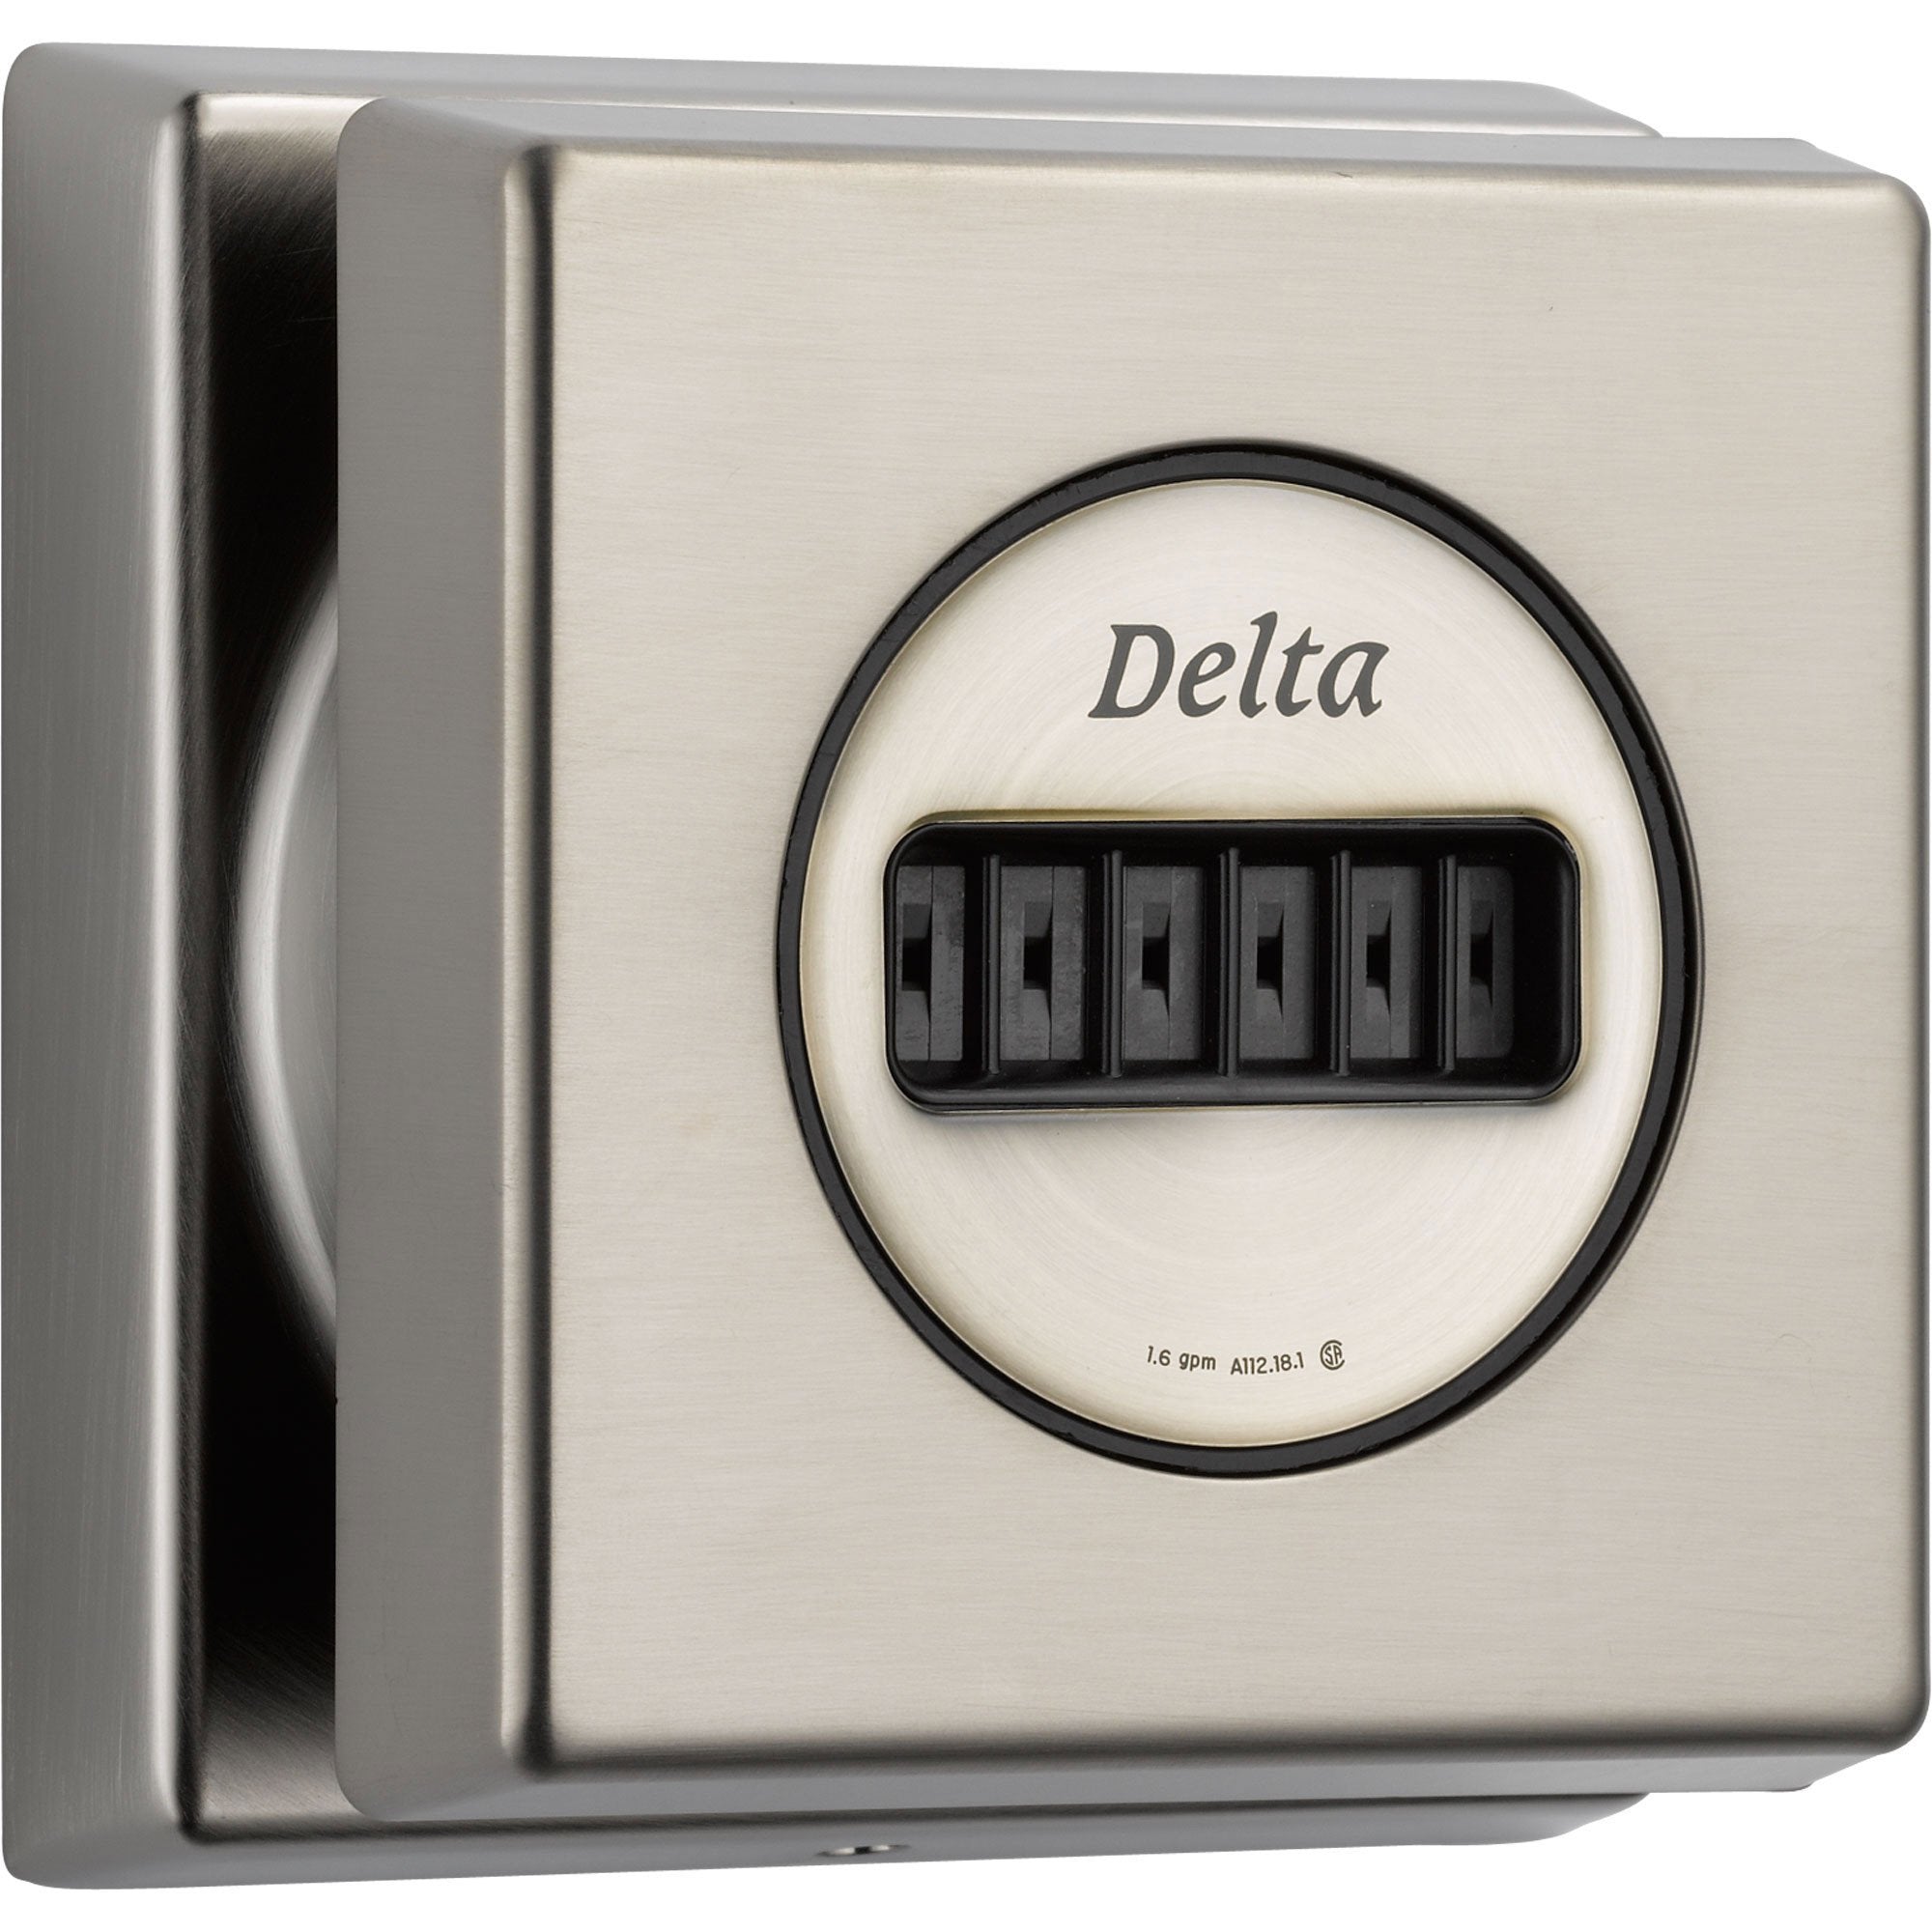 Delta Square H2Okinetic Stainless Steel Finish Body Spray with Valve D959V